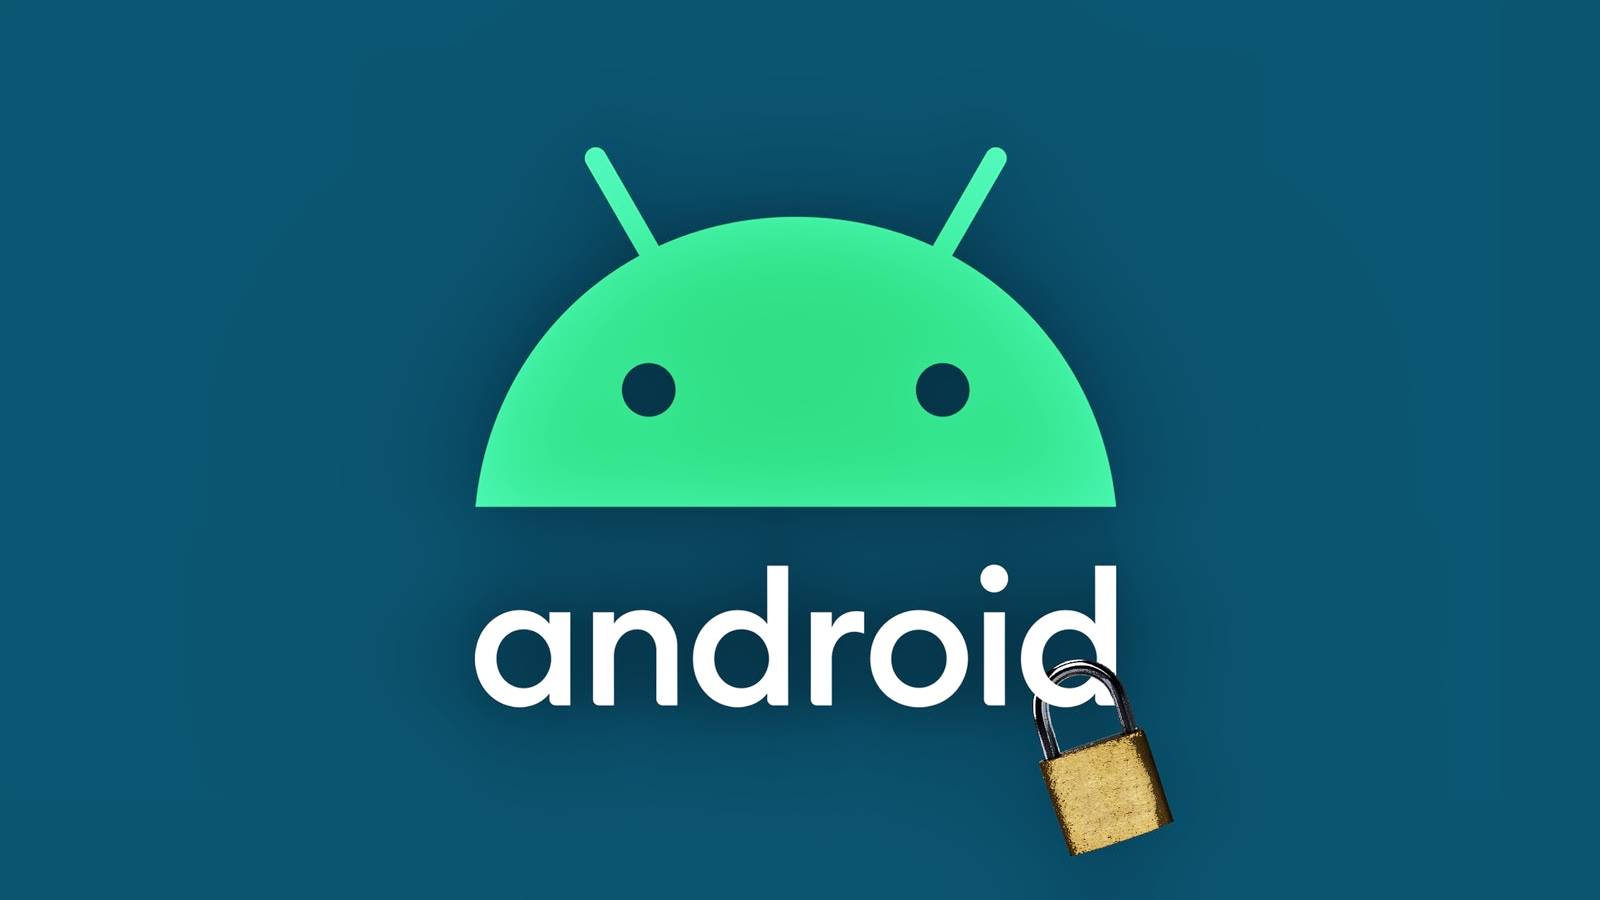 Android vulturAndroid vultur